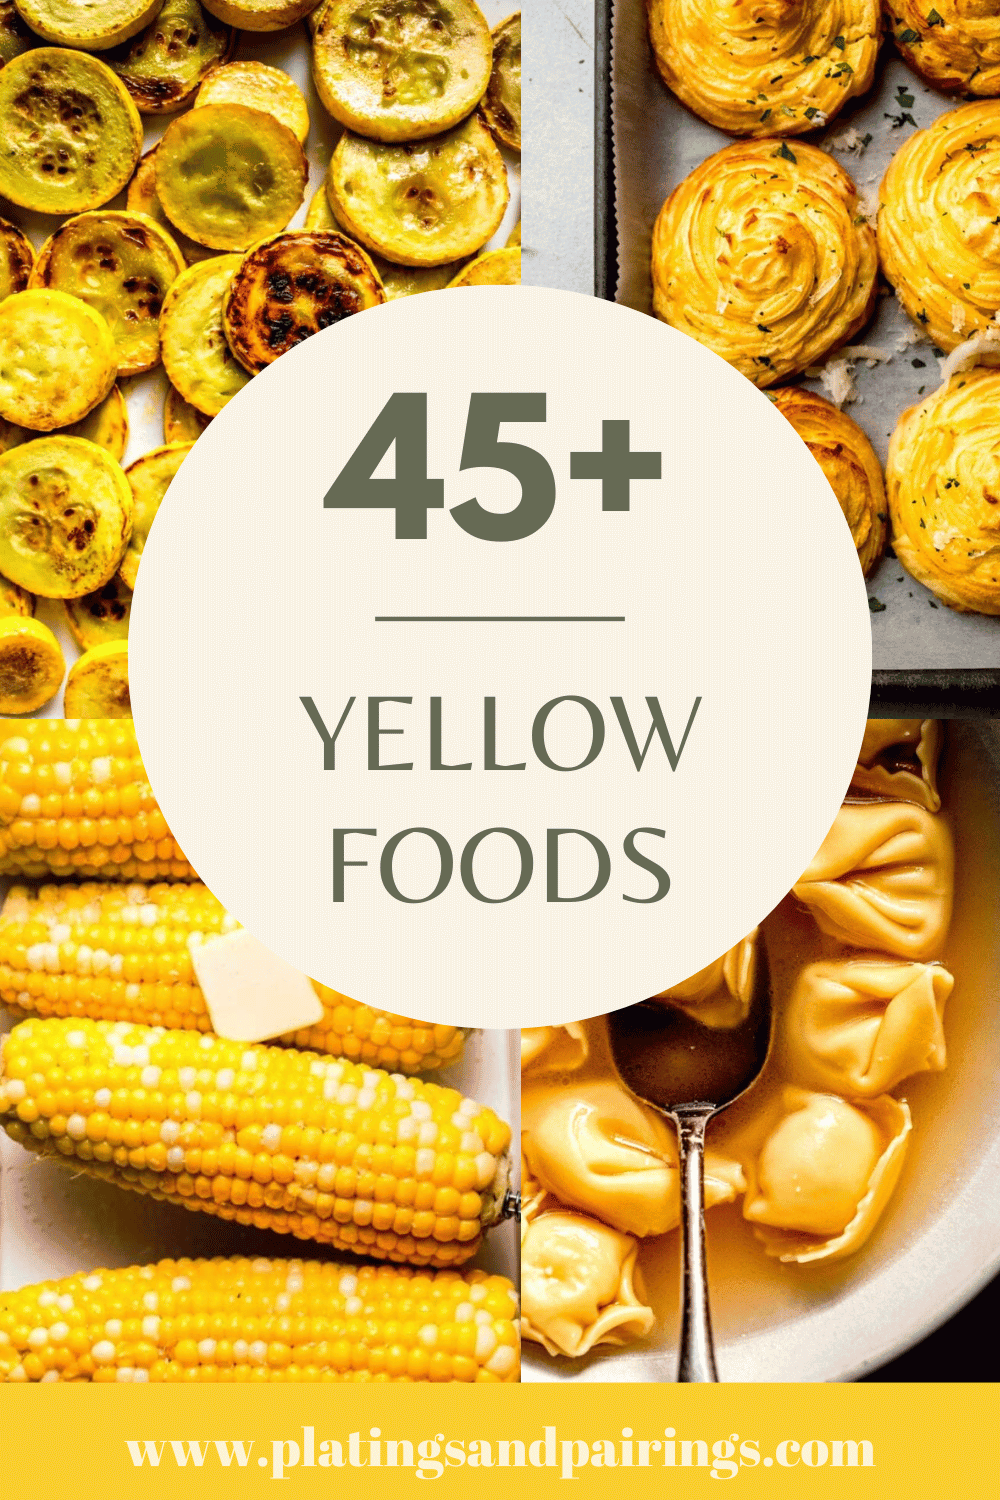 Collage of yellow foods with text overlay.